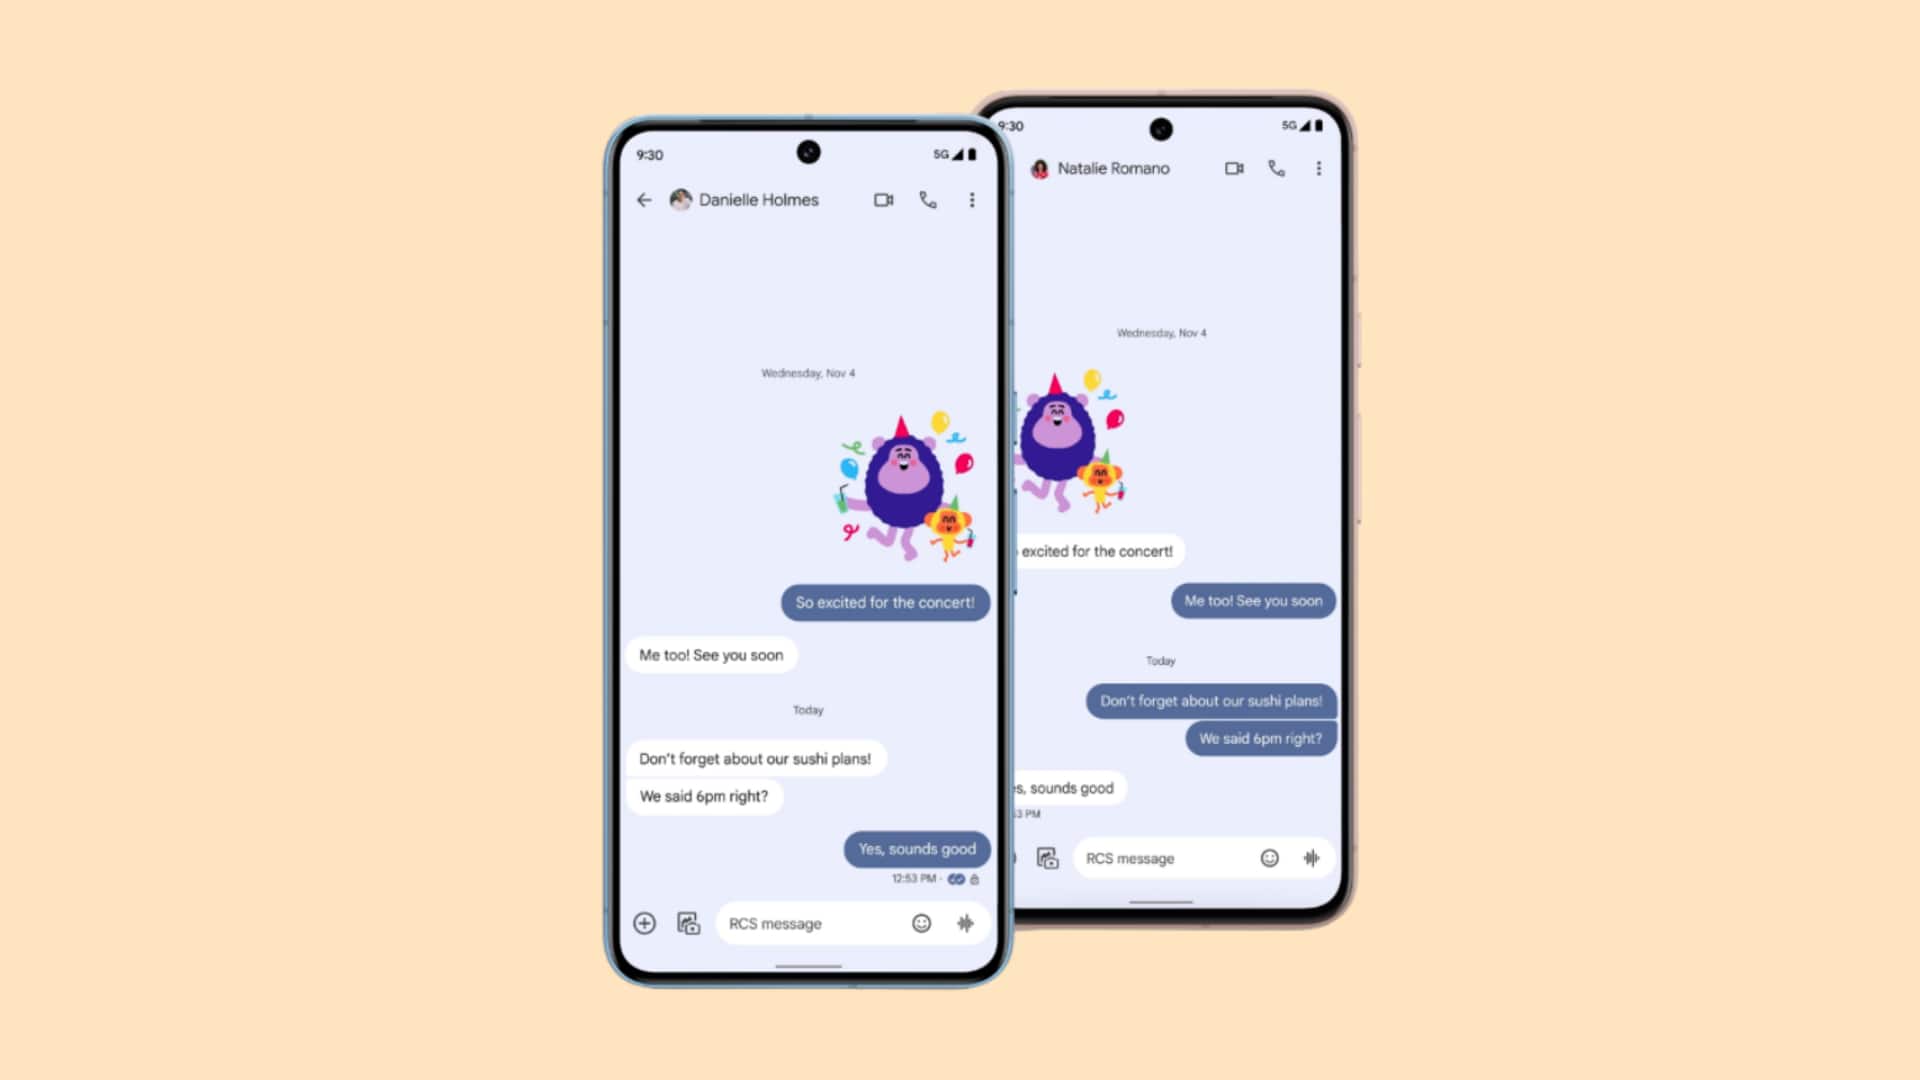 Google Messages's Custom Bubbles is something Apple's iMessage can't have